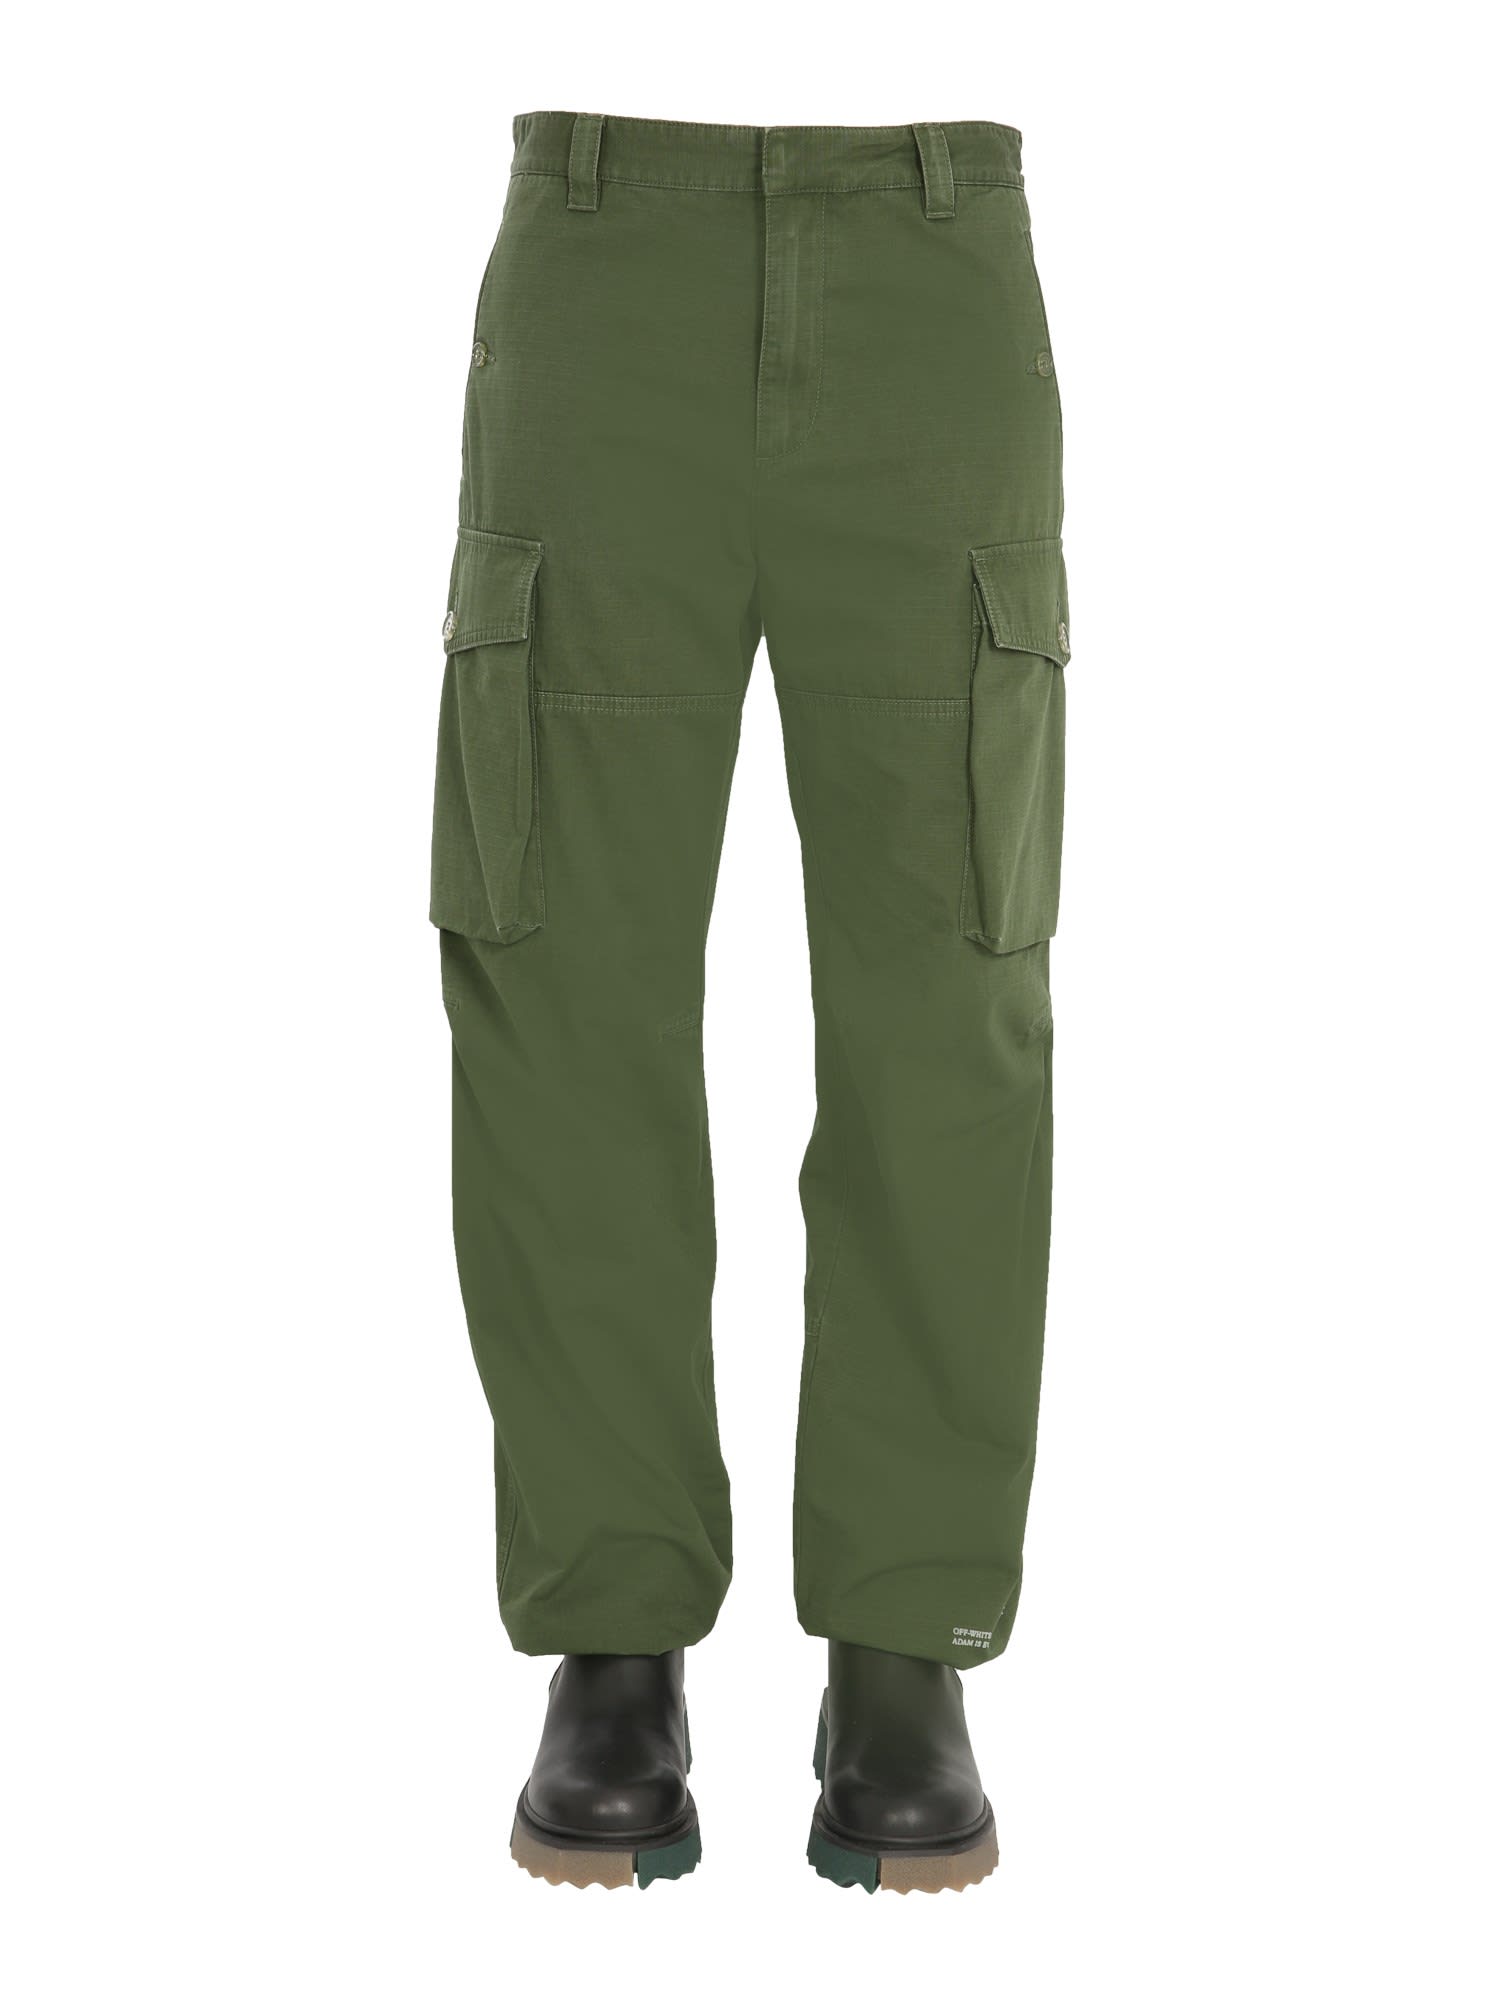 OFF-WHITE COTTON CARGO PANTS,OMCF025 S21FAB0015701